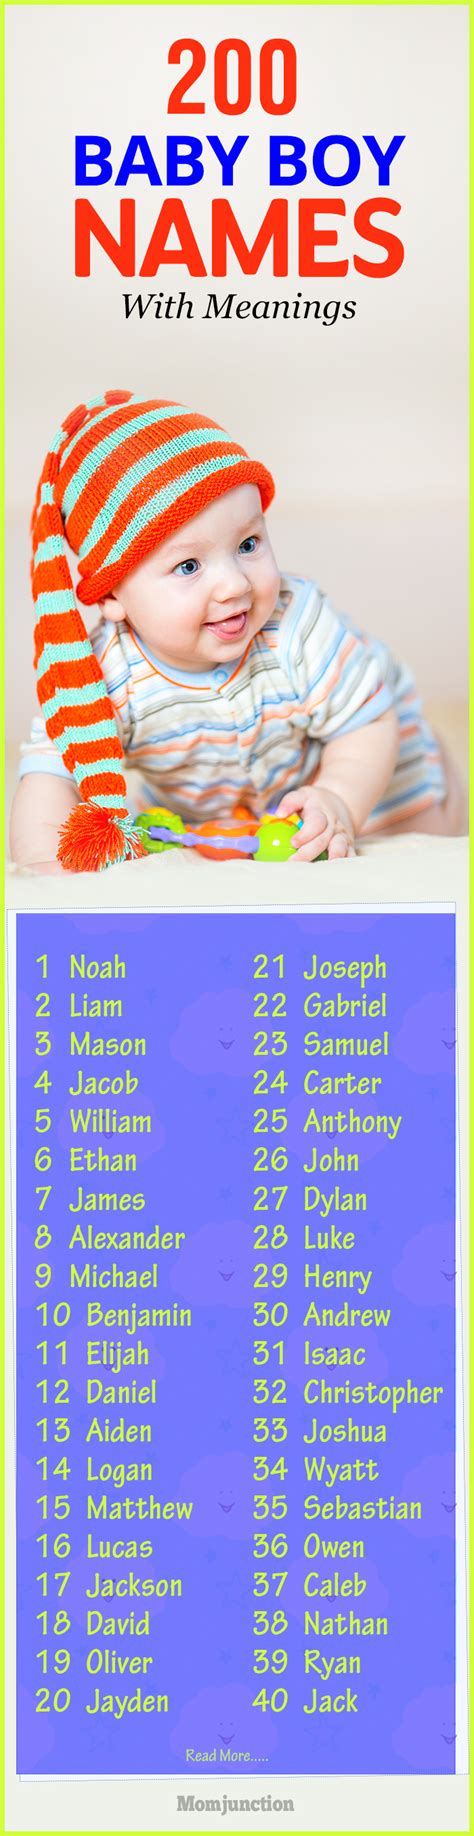 200 Most Popular Baby Boy Names With Meanings For 2018